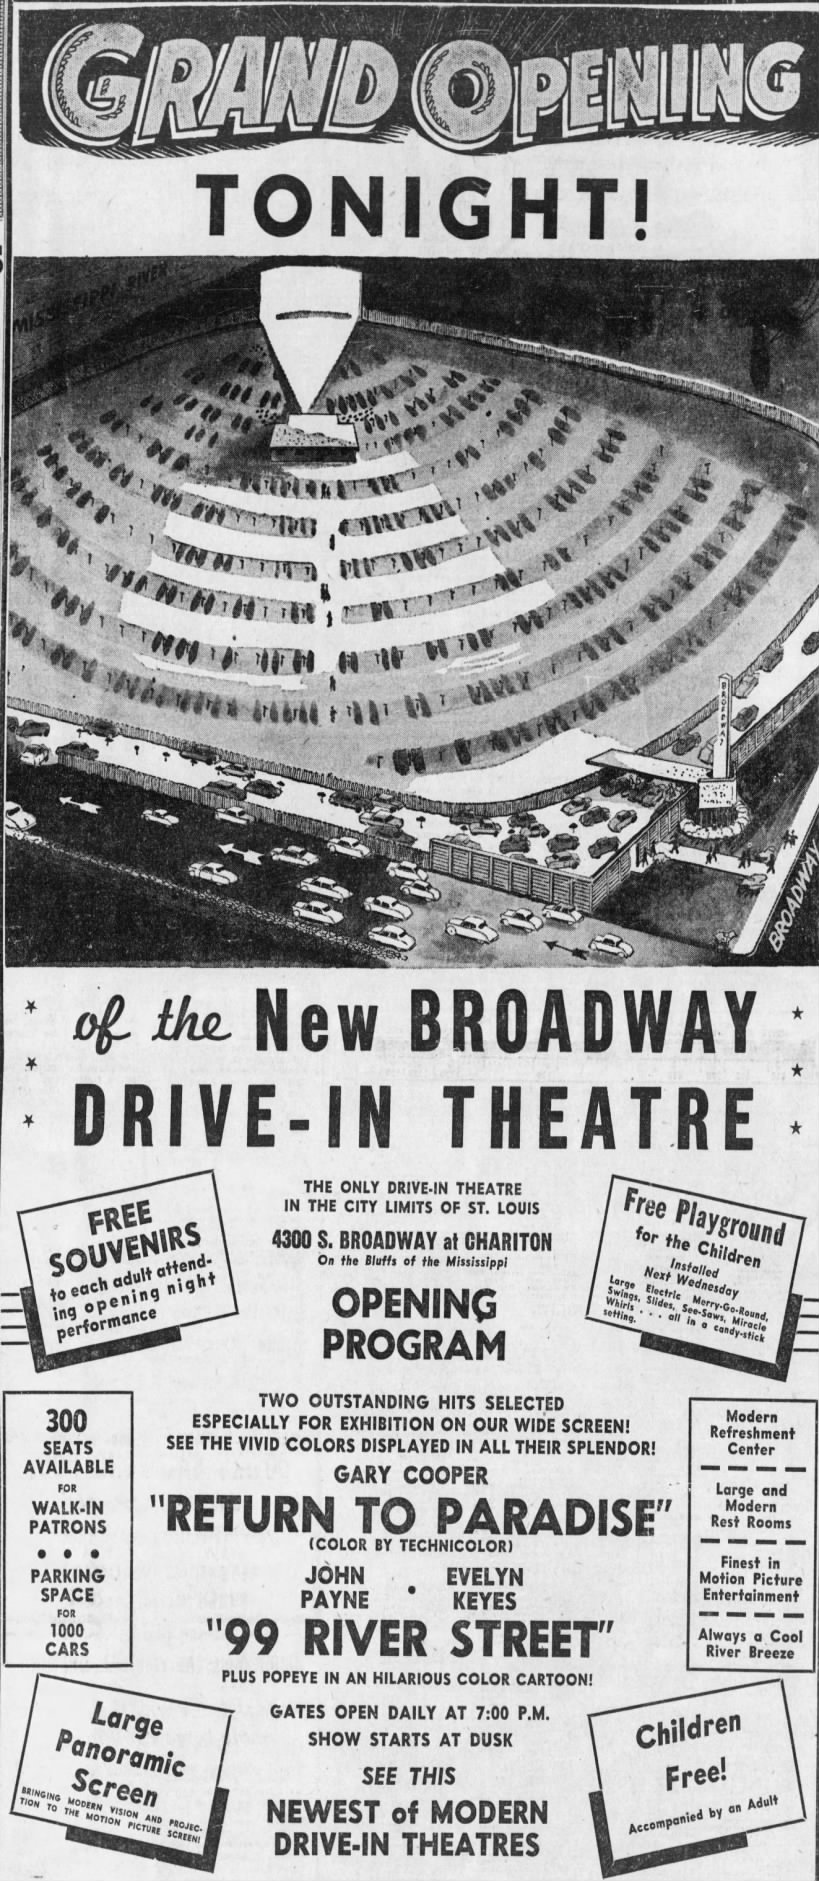 May 30, 1954: The grand opening of the Broadway Drive-In